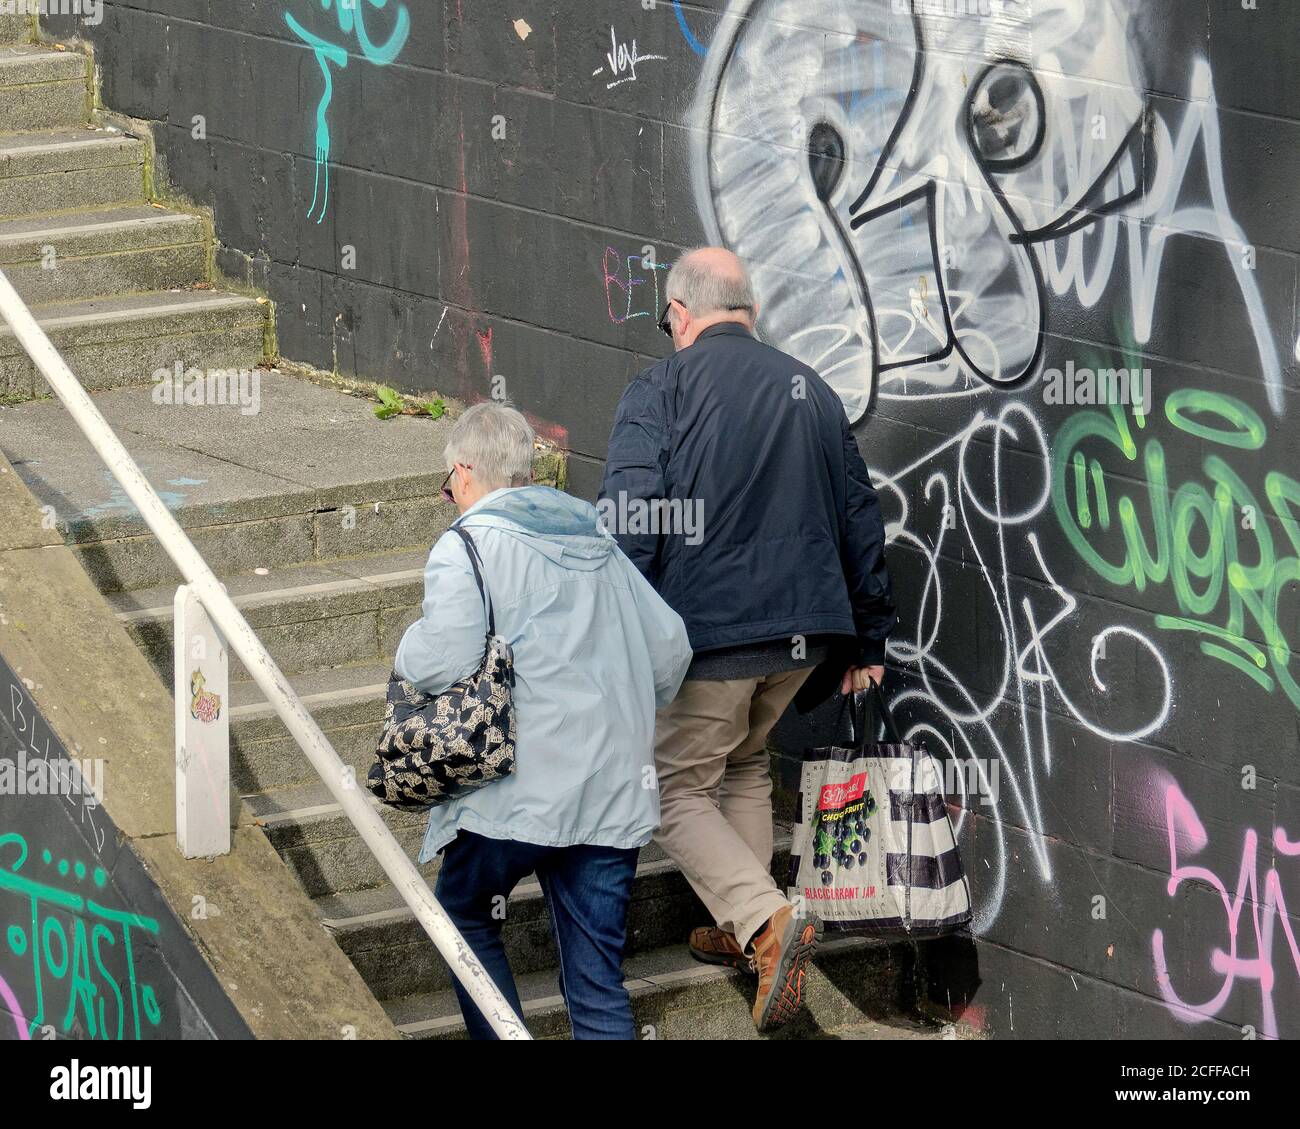 Glasgow, Scotland, UK, 5th September, 2020: The city is still in lockdown as locals and tourists continue through the pandemic..Credit: Gerard Ferry/Alamy Live News Stock Photo